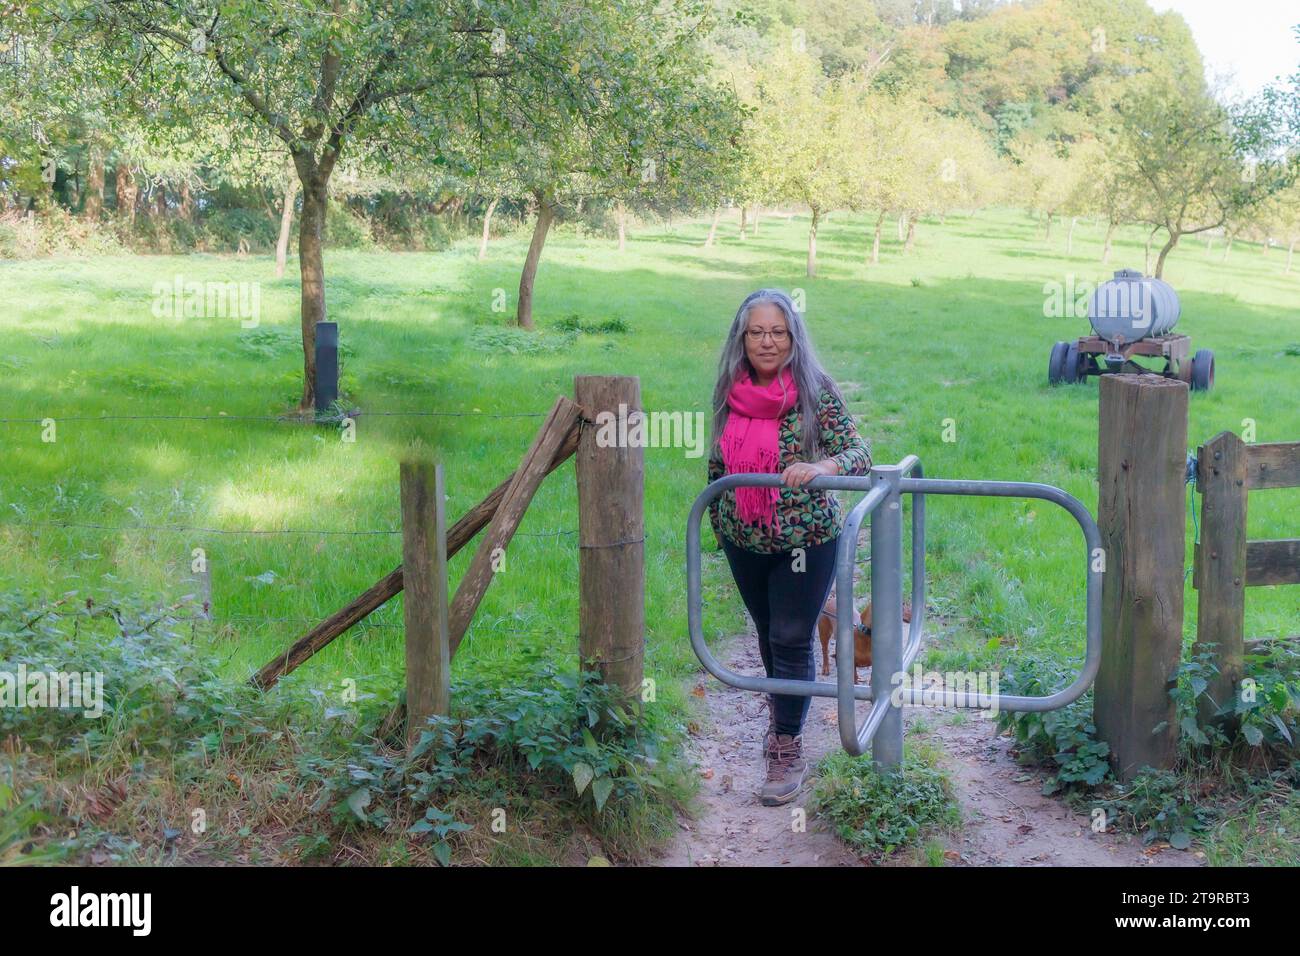 Senior hiker with his dog entering Stammenderbos nature reserve, revolving gate, trees on agricultural plot in misty background, pink shawl, sunny day Stock Photo